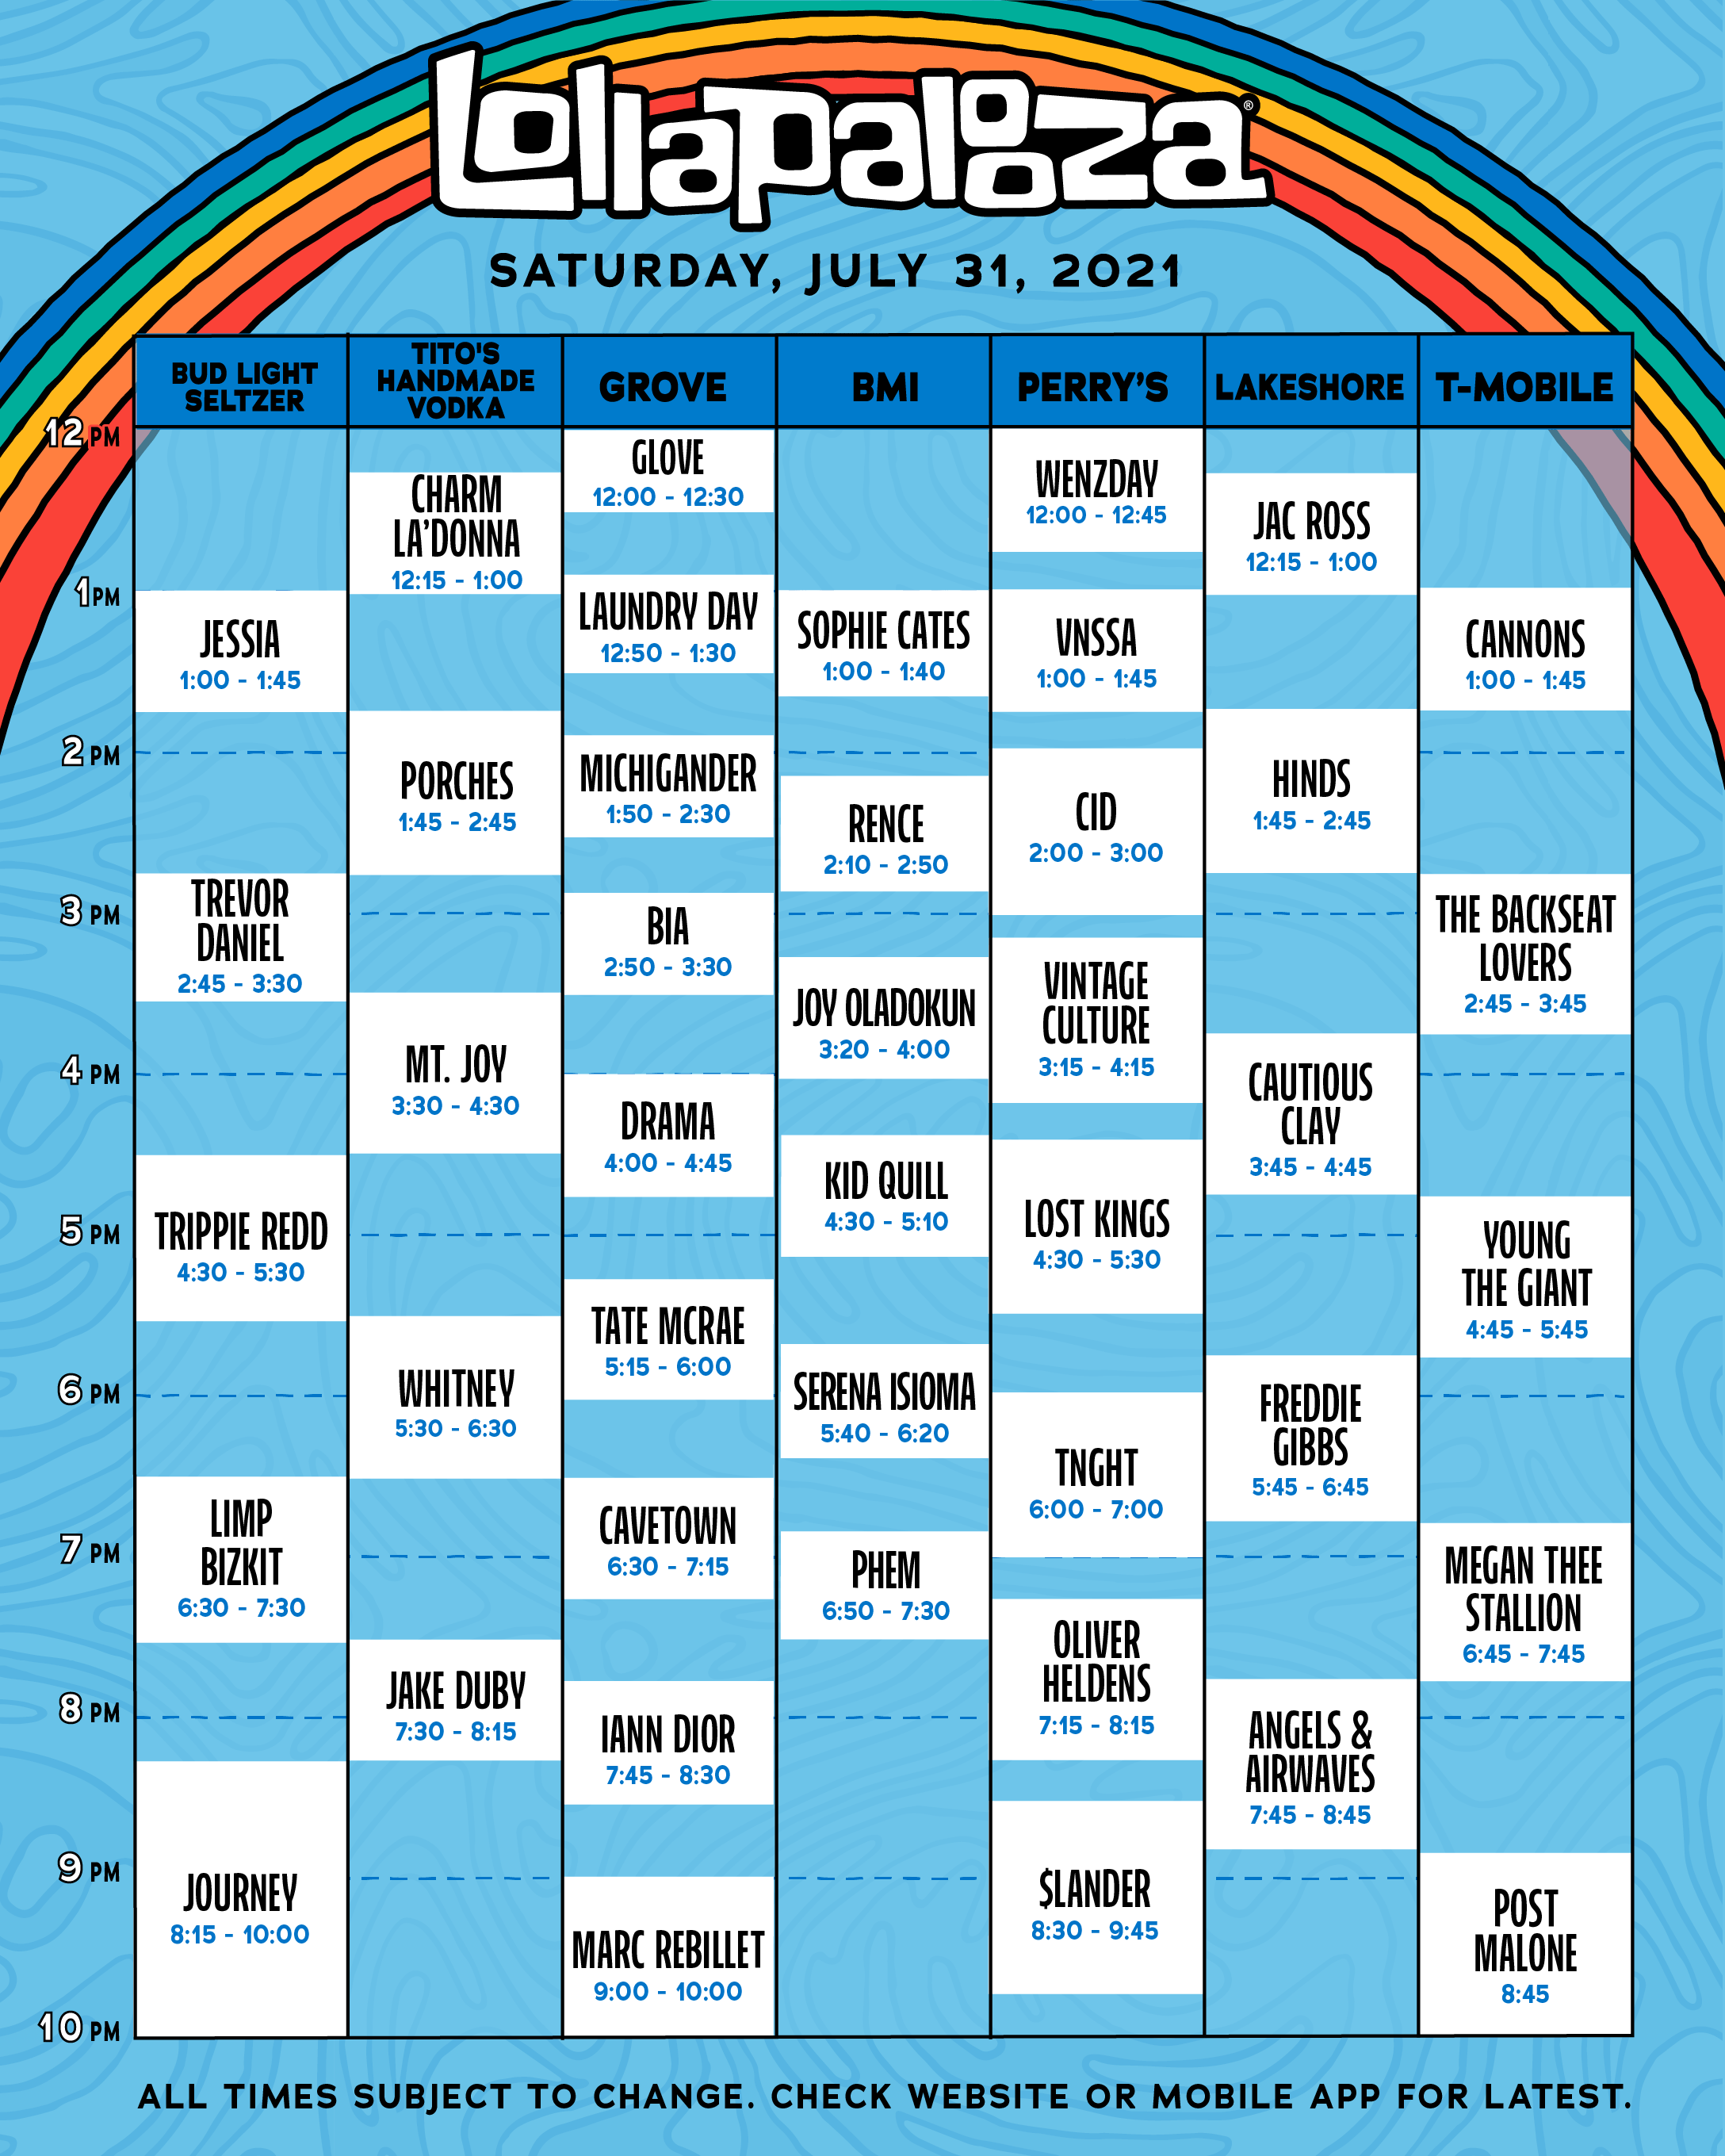 Lollapalooza Full 2021 Schedule Announced! 3